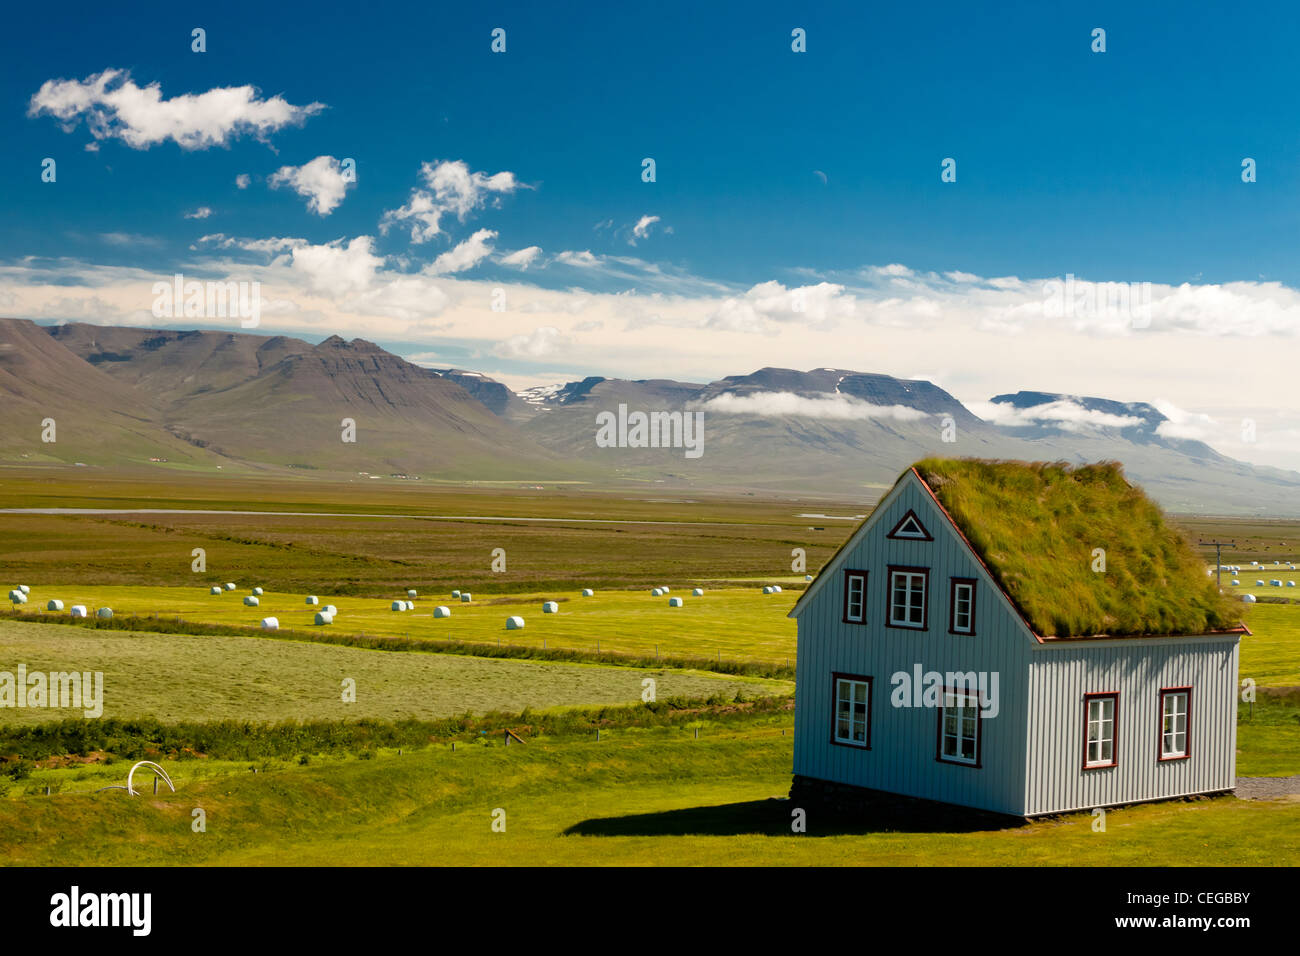 Old farm with mossy roof and typical icelandic landscape. Stock Photo